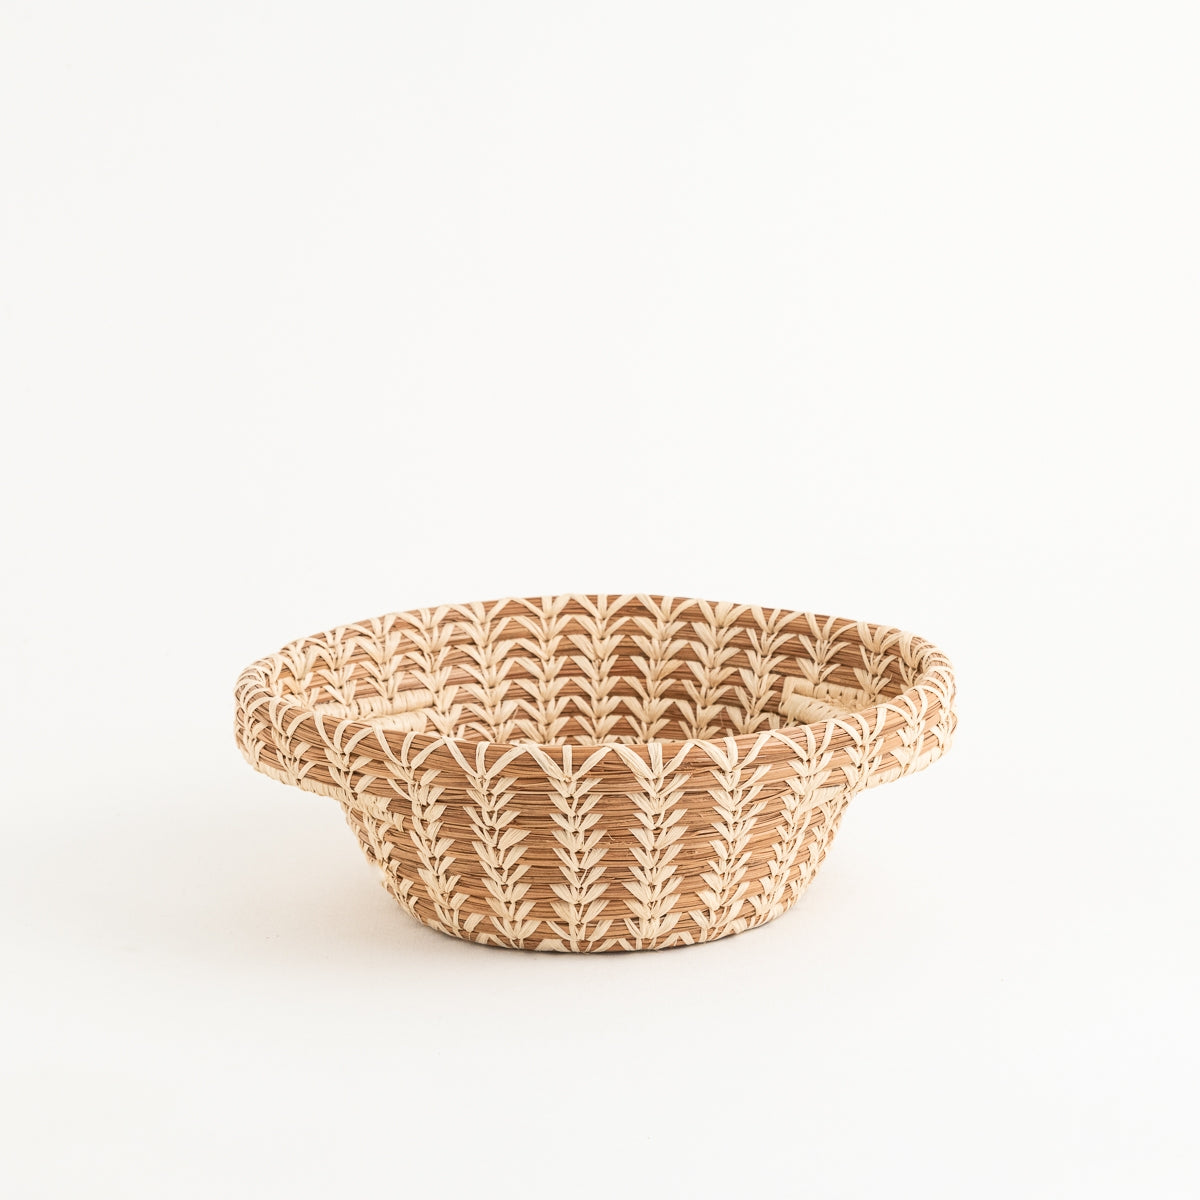 A pine needle basket with lacy handles was designed by Mayan Hands artisan partners. Basket lovers like to display its intricate raffia stitching, but this basket is functional and practical too.